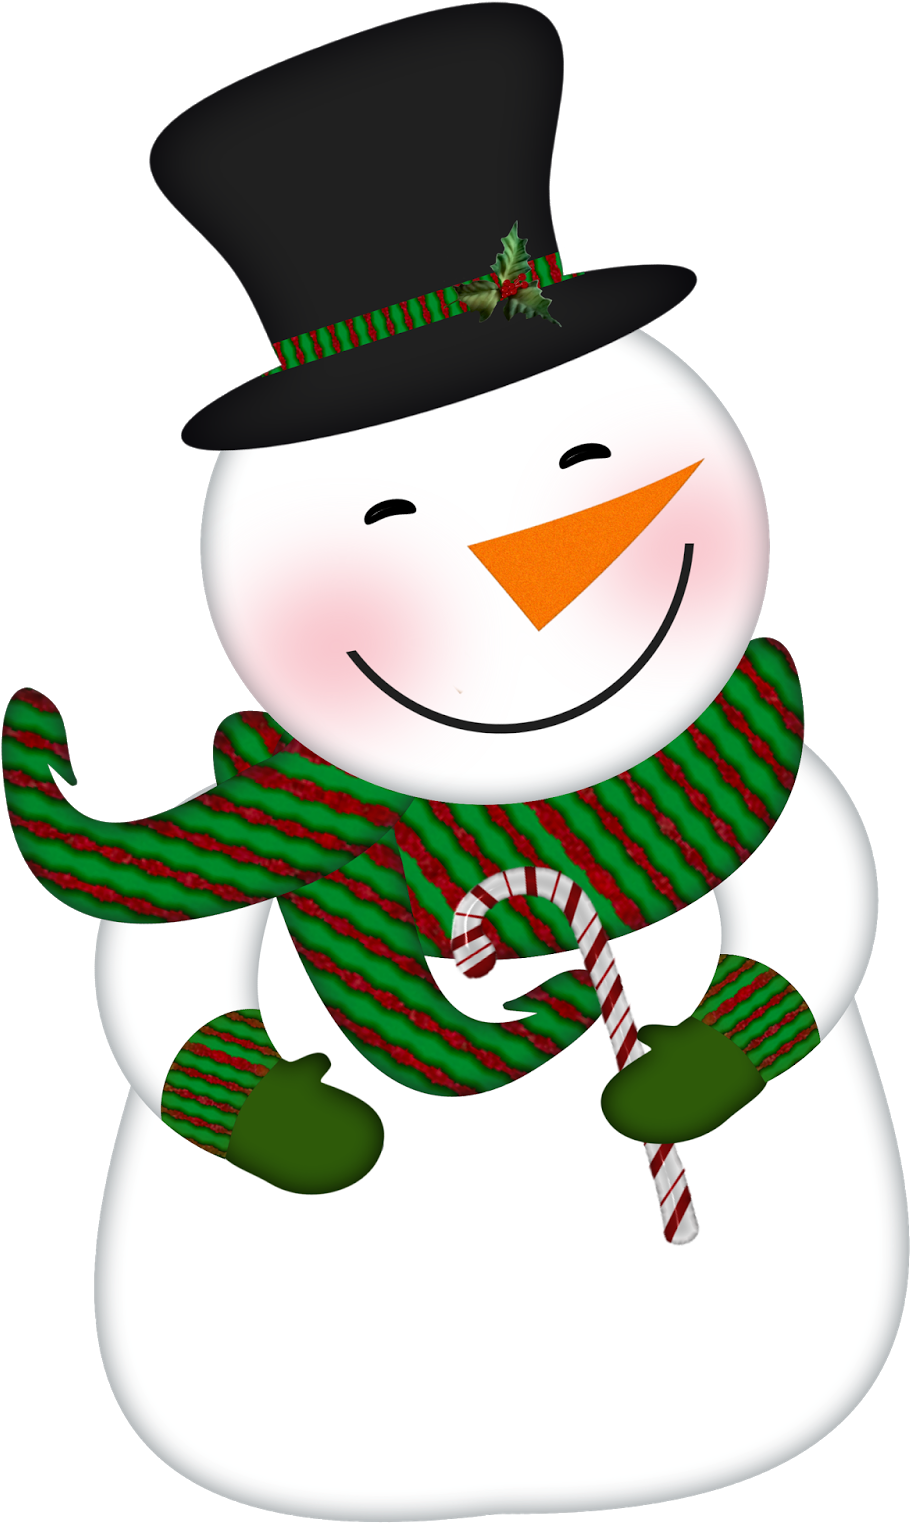 Cut And Paste Snowman Worksheet - Cut And Paste Snowman Worksheet (1309x1600)